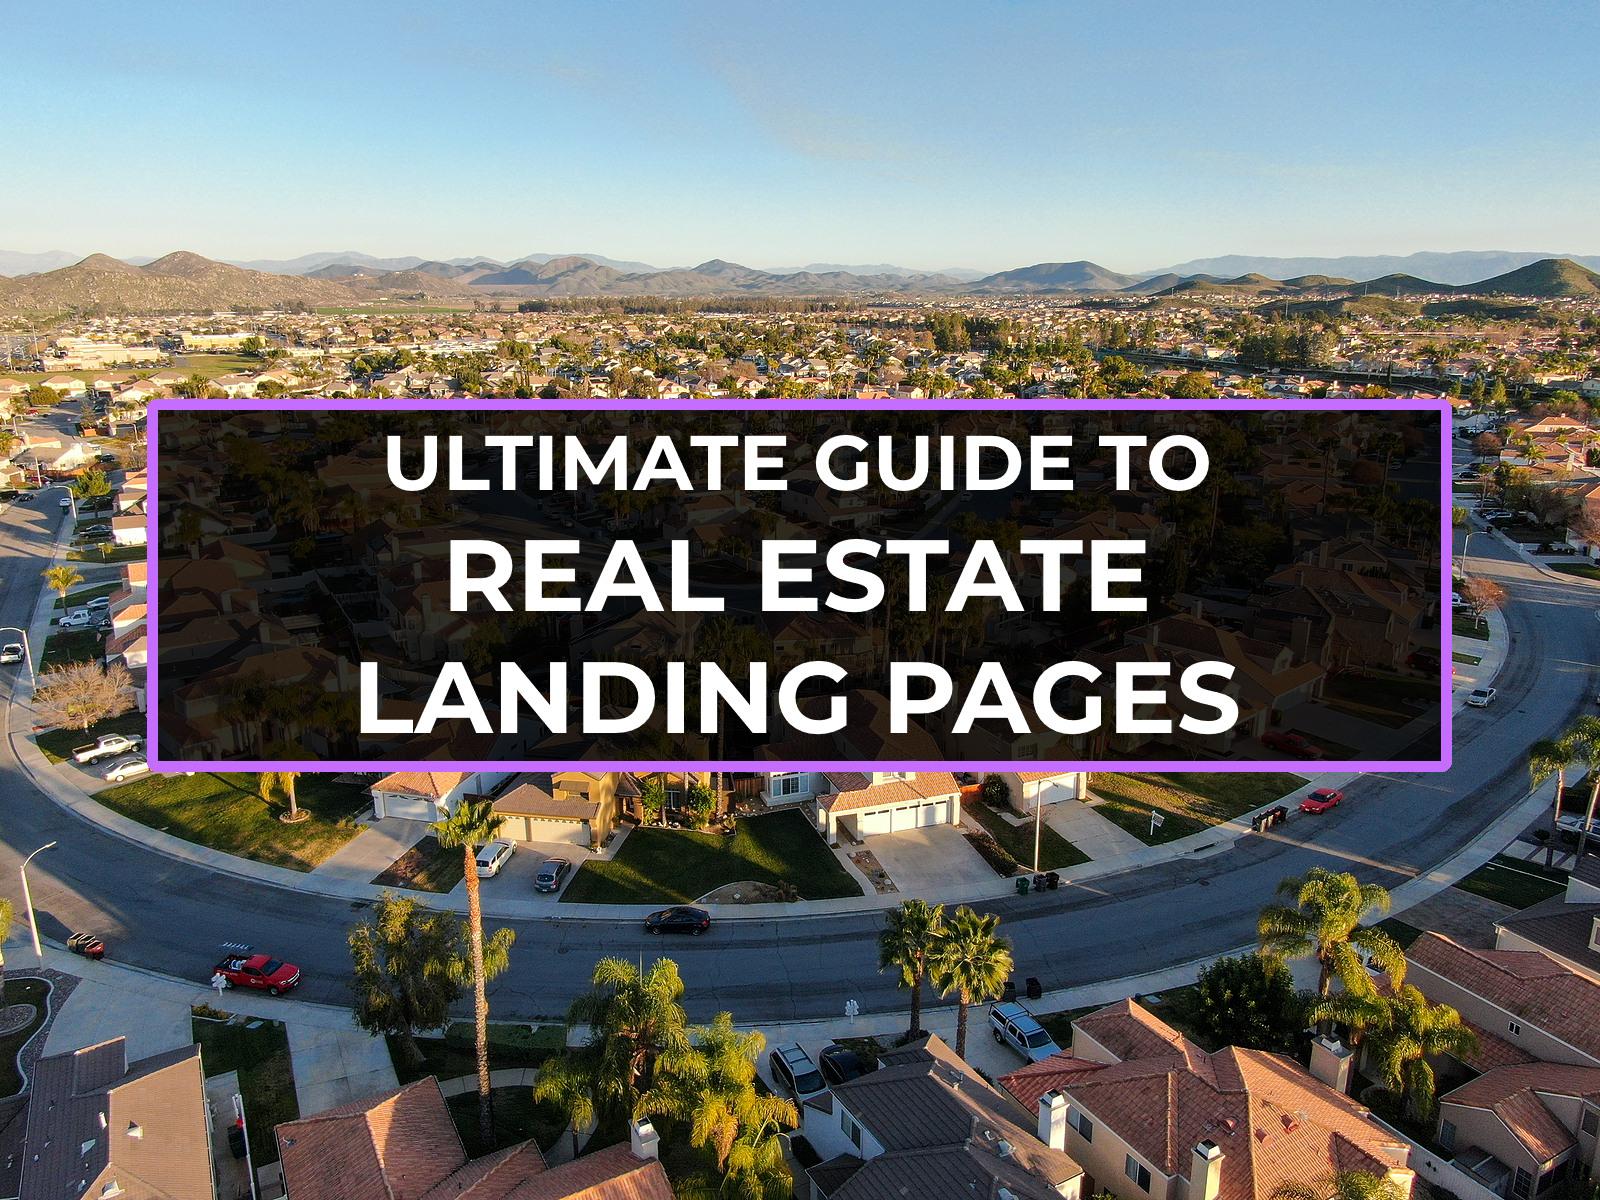 GUIDE TO REAL ESTATE LANDING PAGES